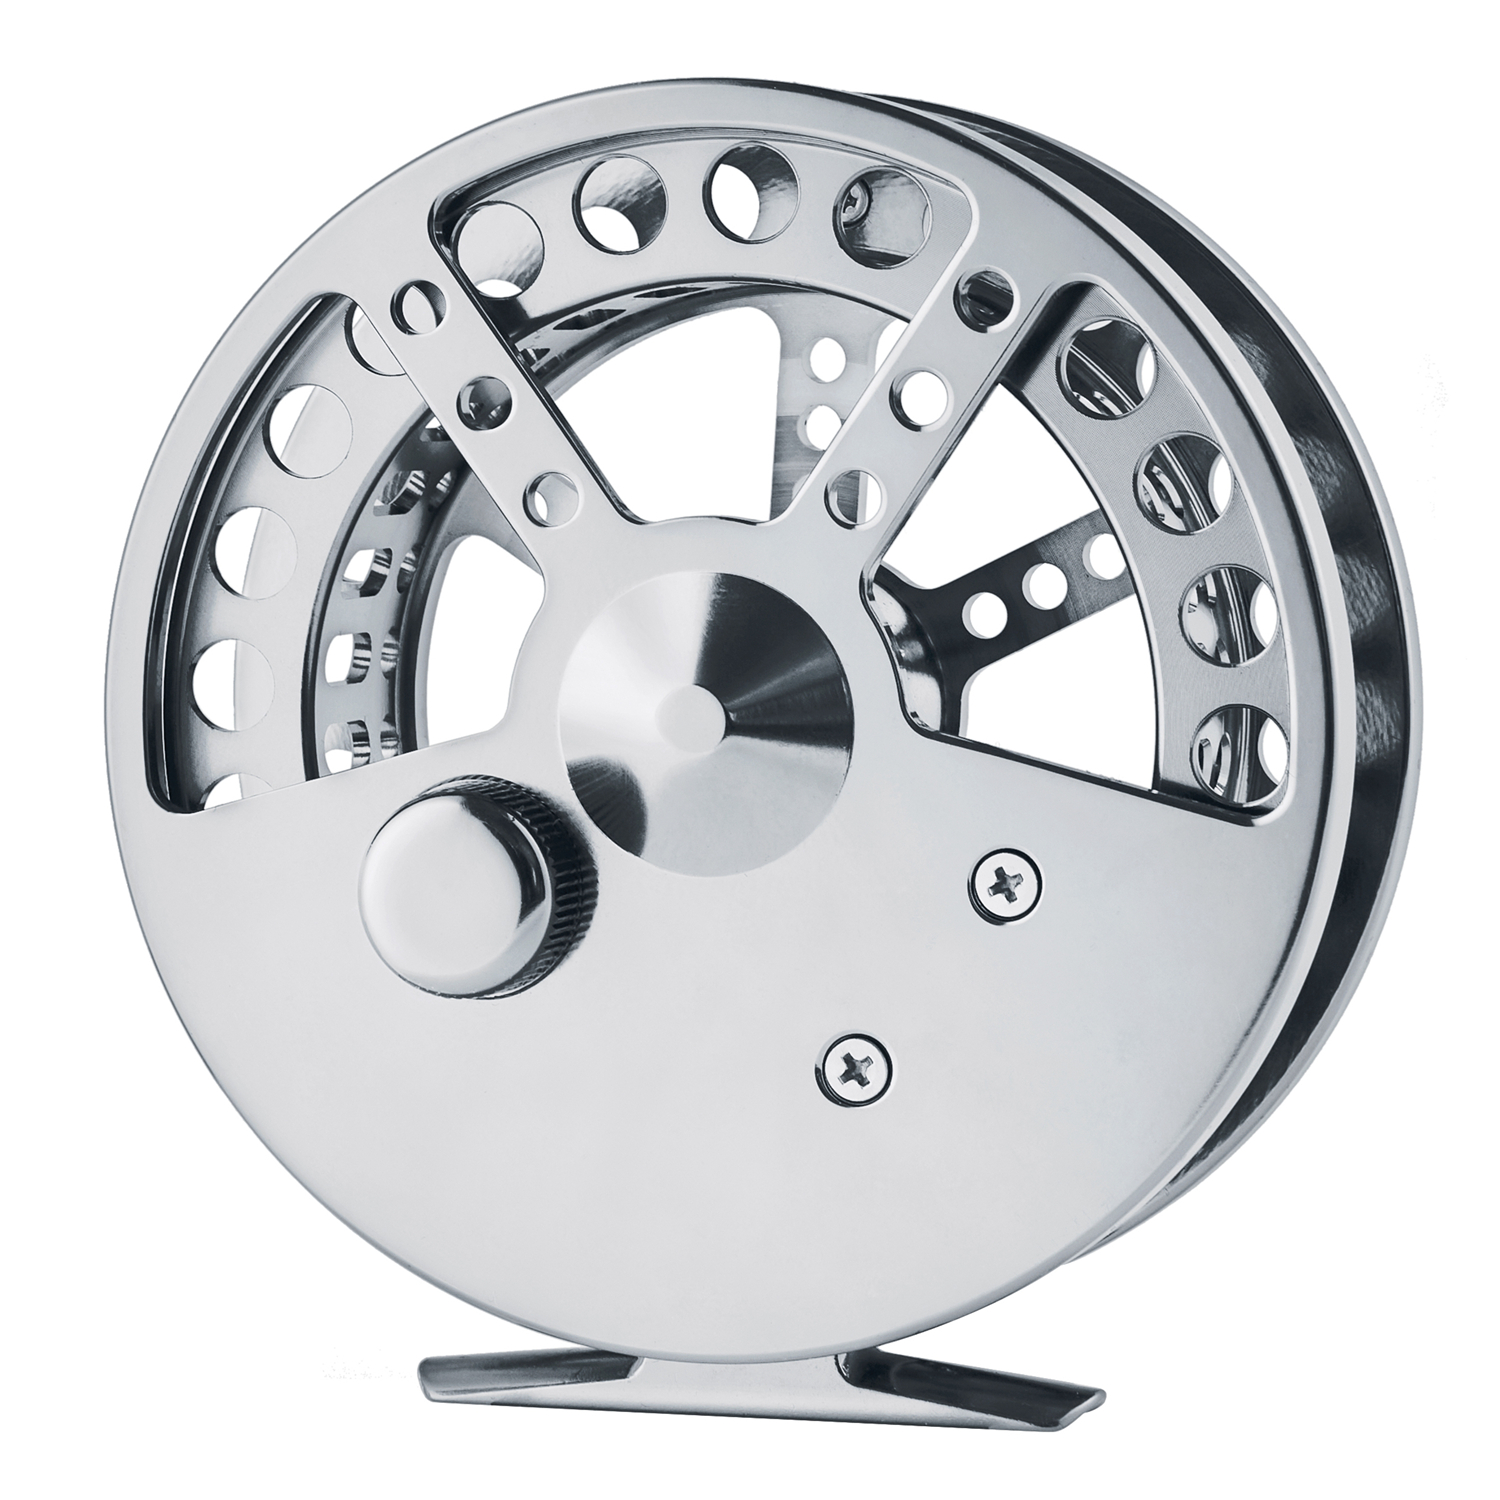 High-Quality CNC Machined Aluminum Centerpin Float Fishing Reel - Ideal for  Steelhead, Salmon, Freshwater, and Saltwater Coarse Fishing